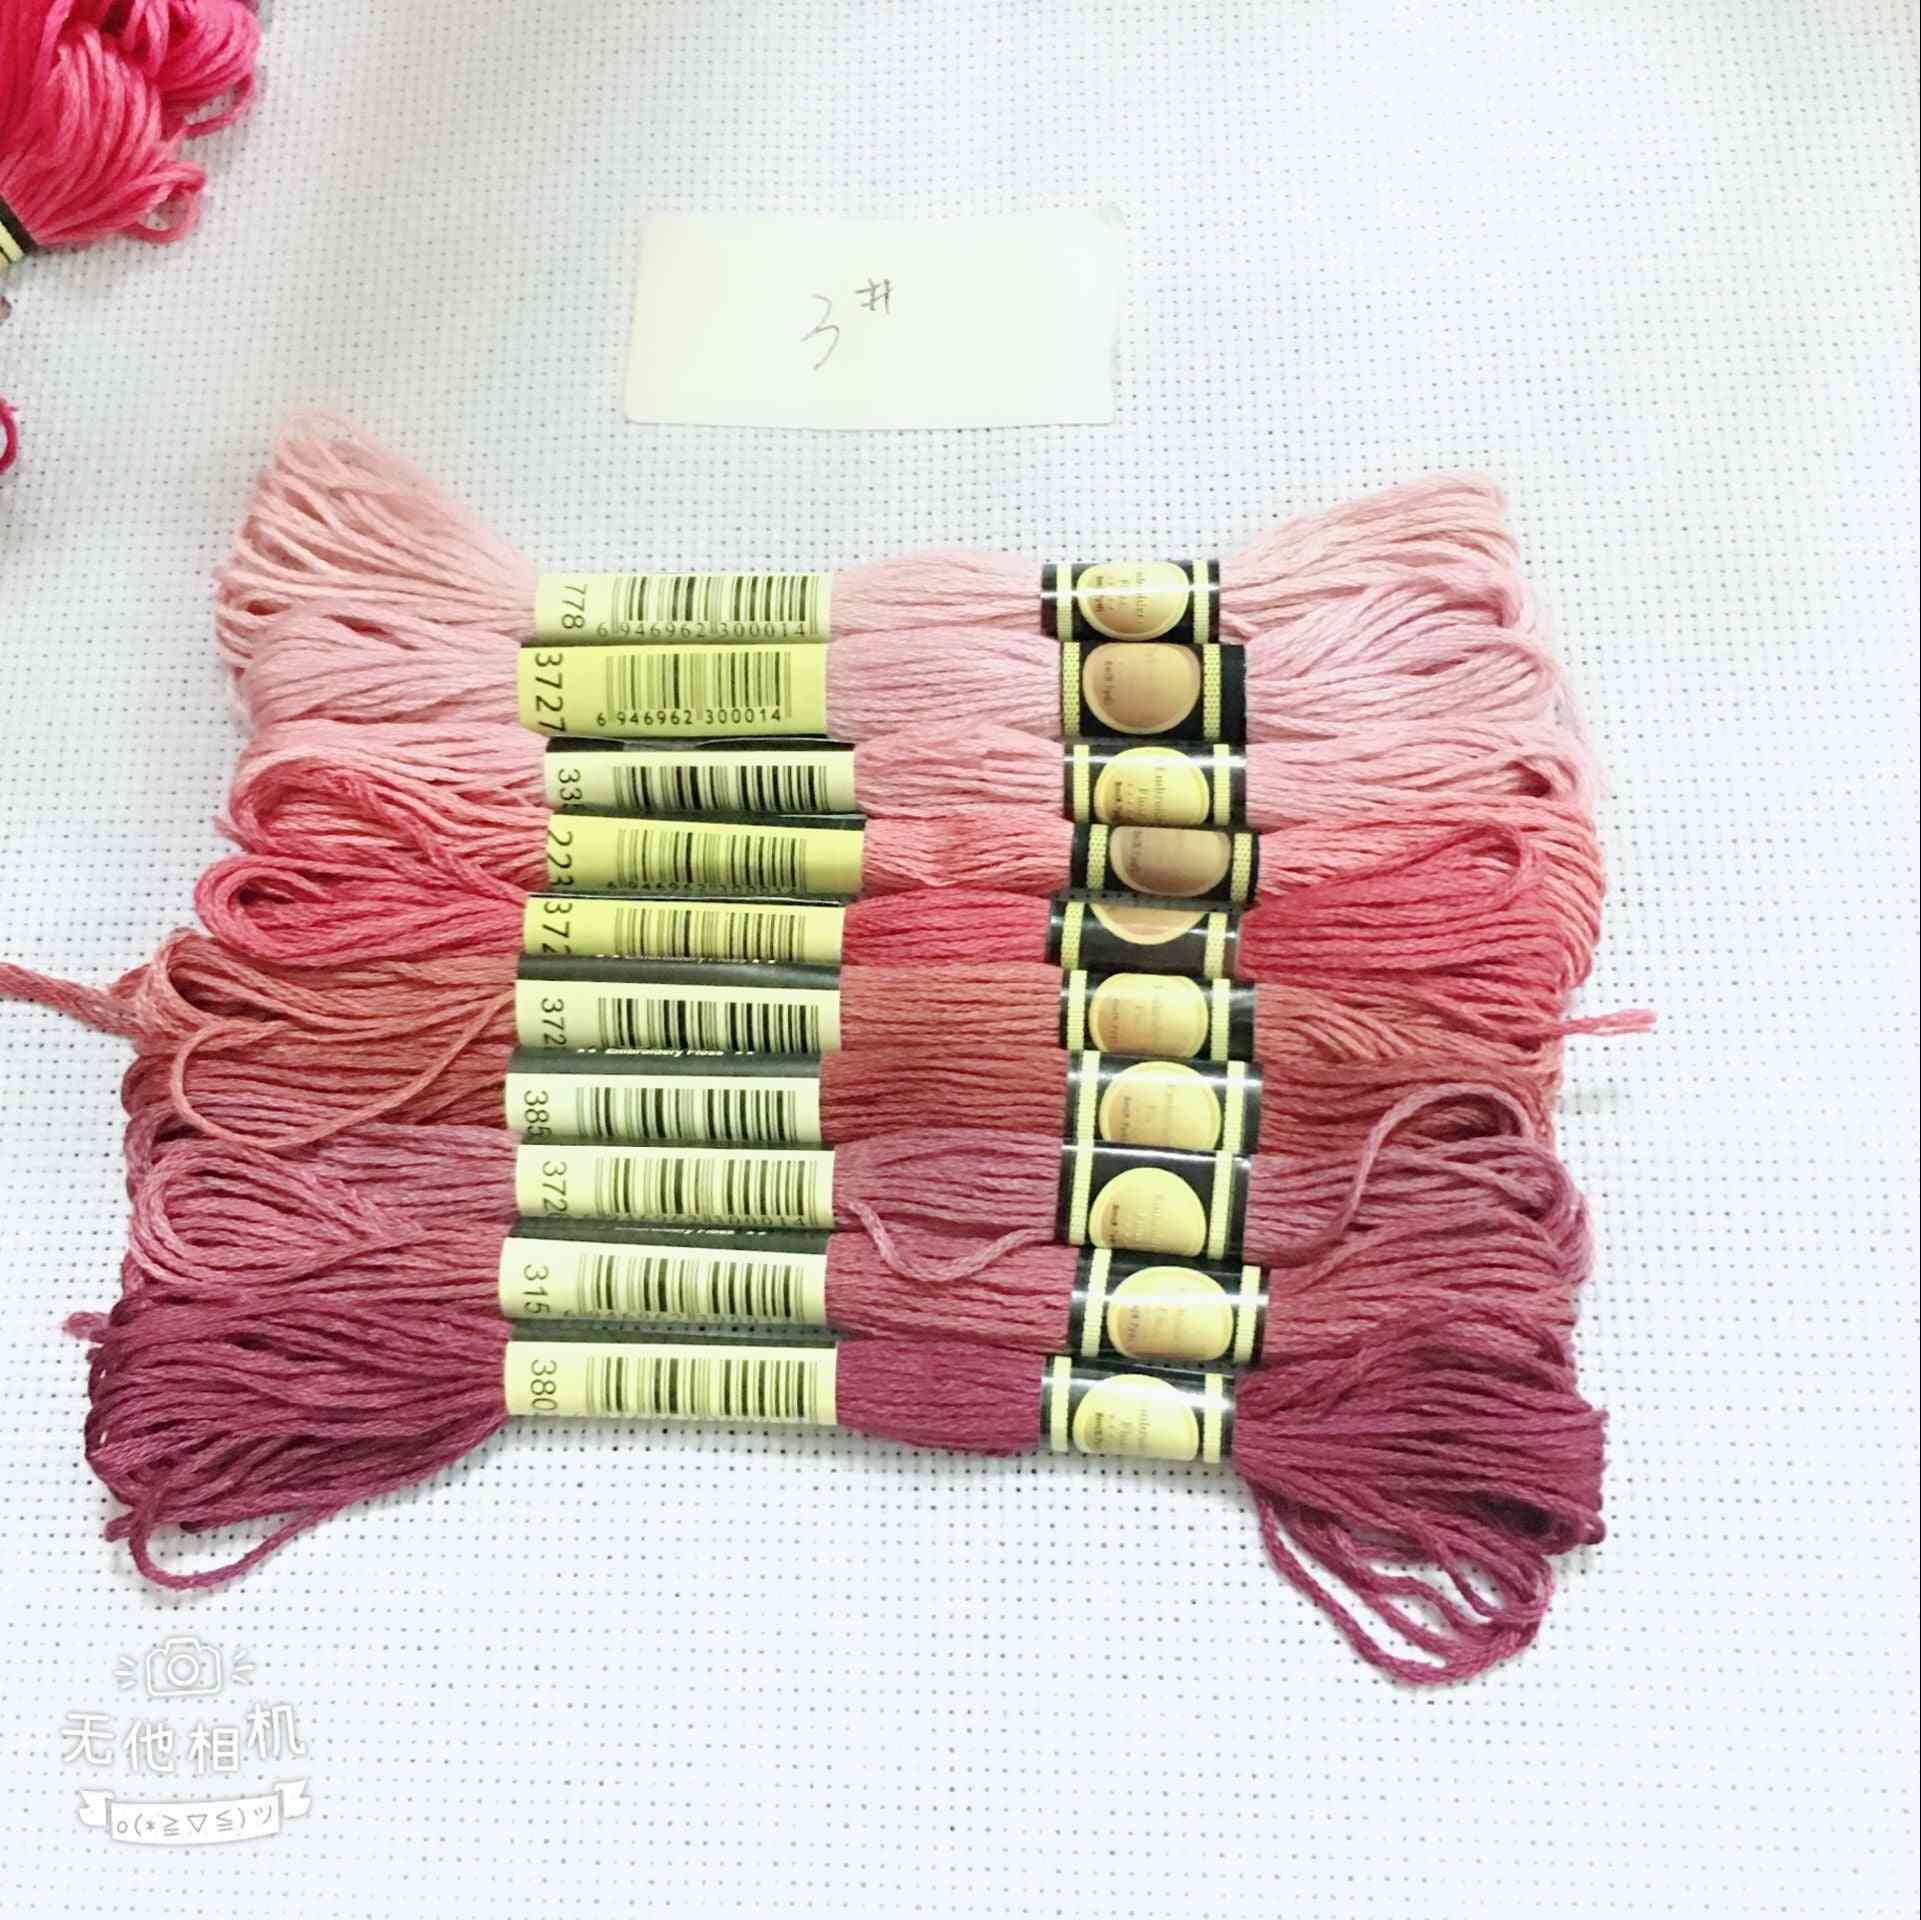 8pcs Mix Colors Cross Stitch Cotton Sewing - Skeins Craft Embroidery Thread Floss Kit